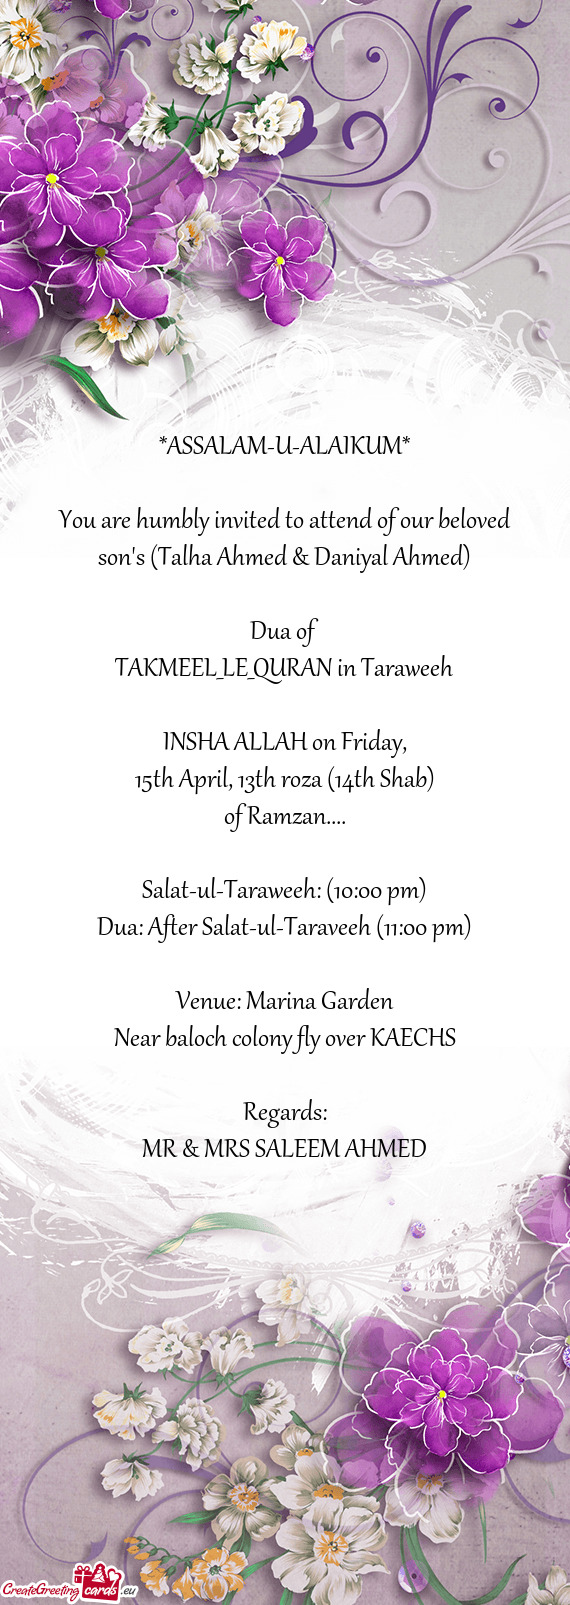 You are humbly invited to attend of our beloved son